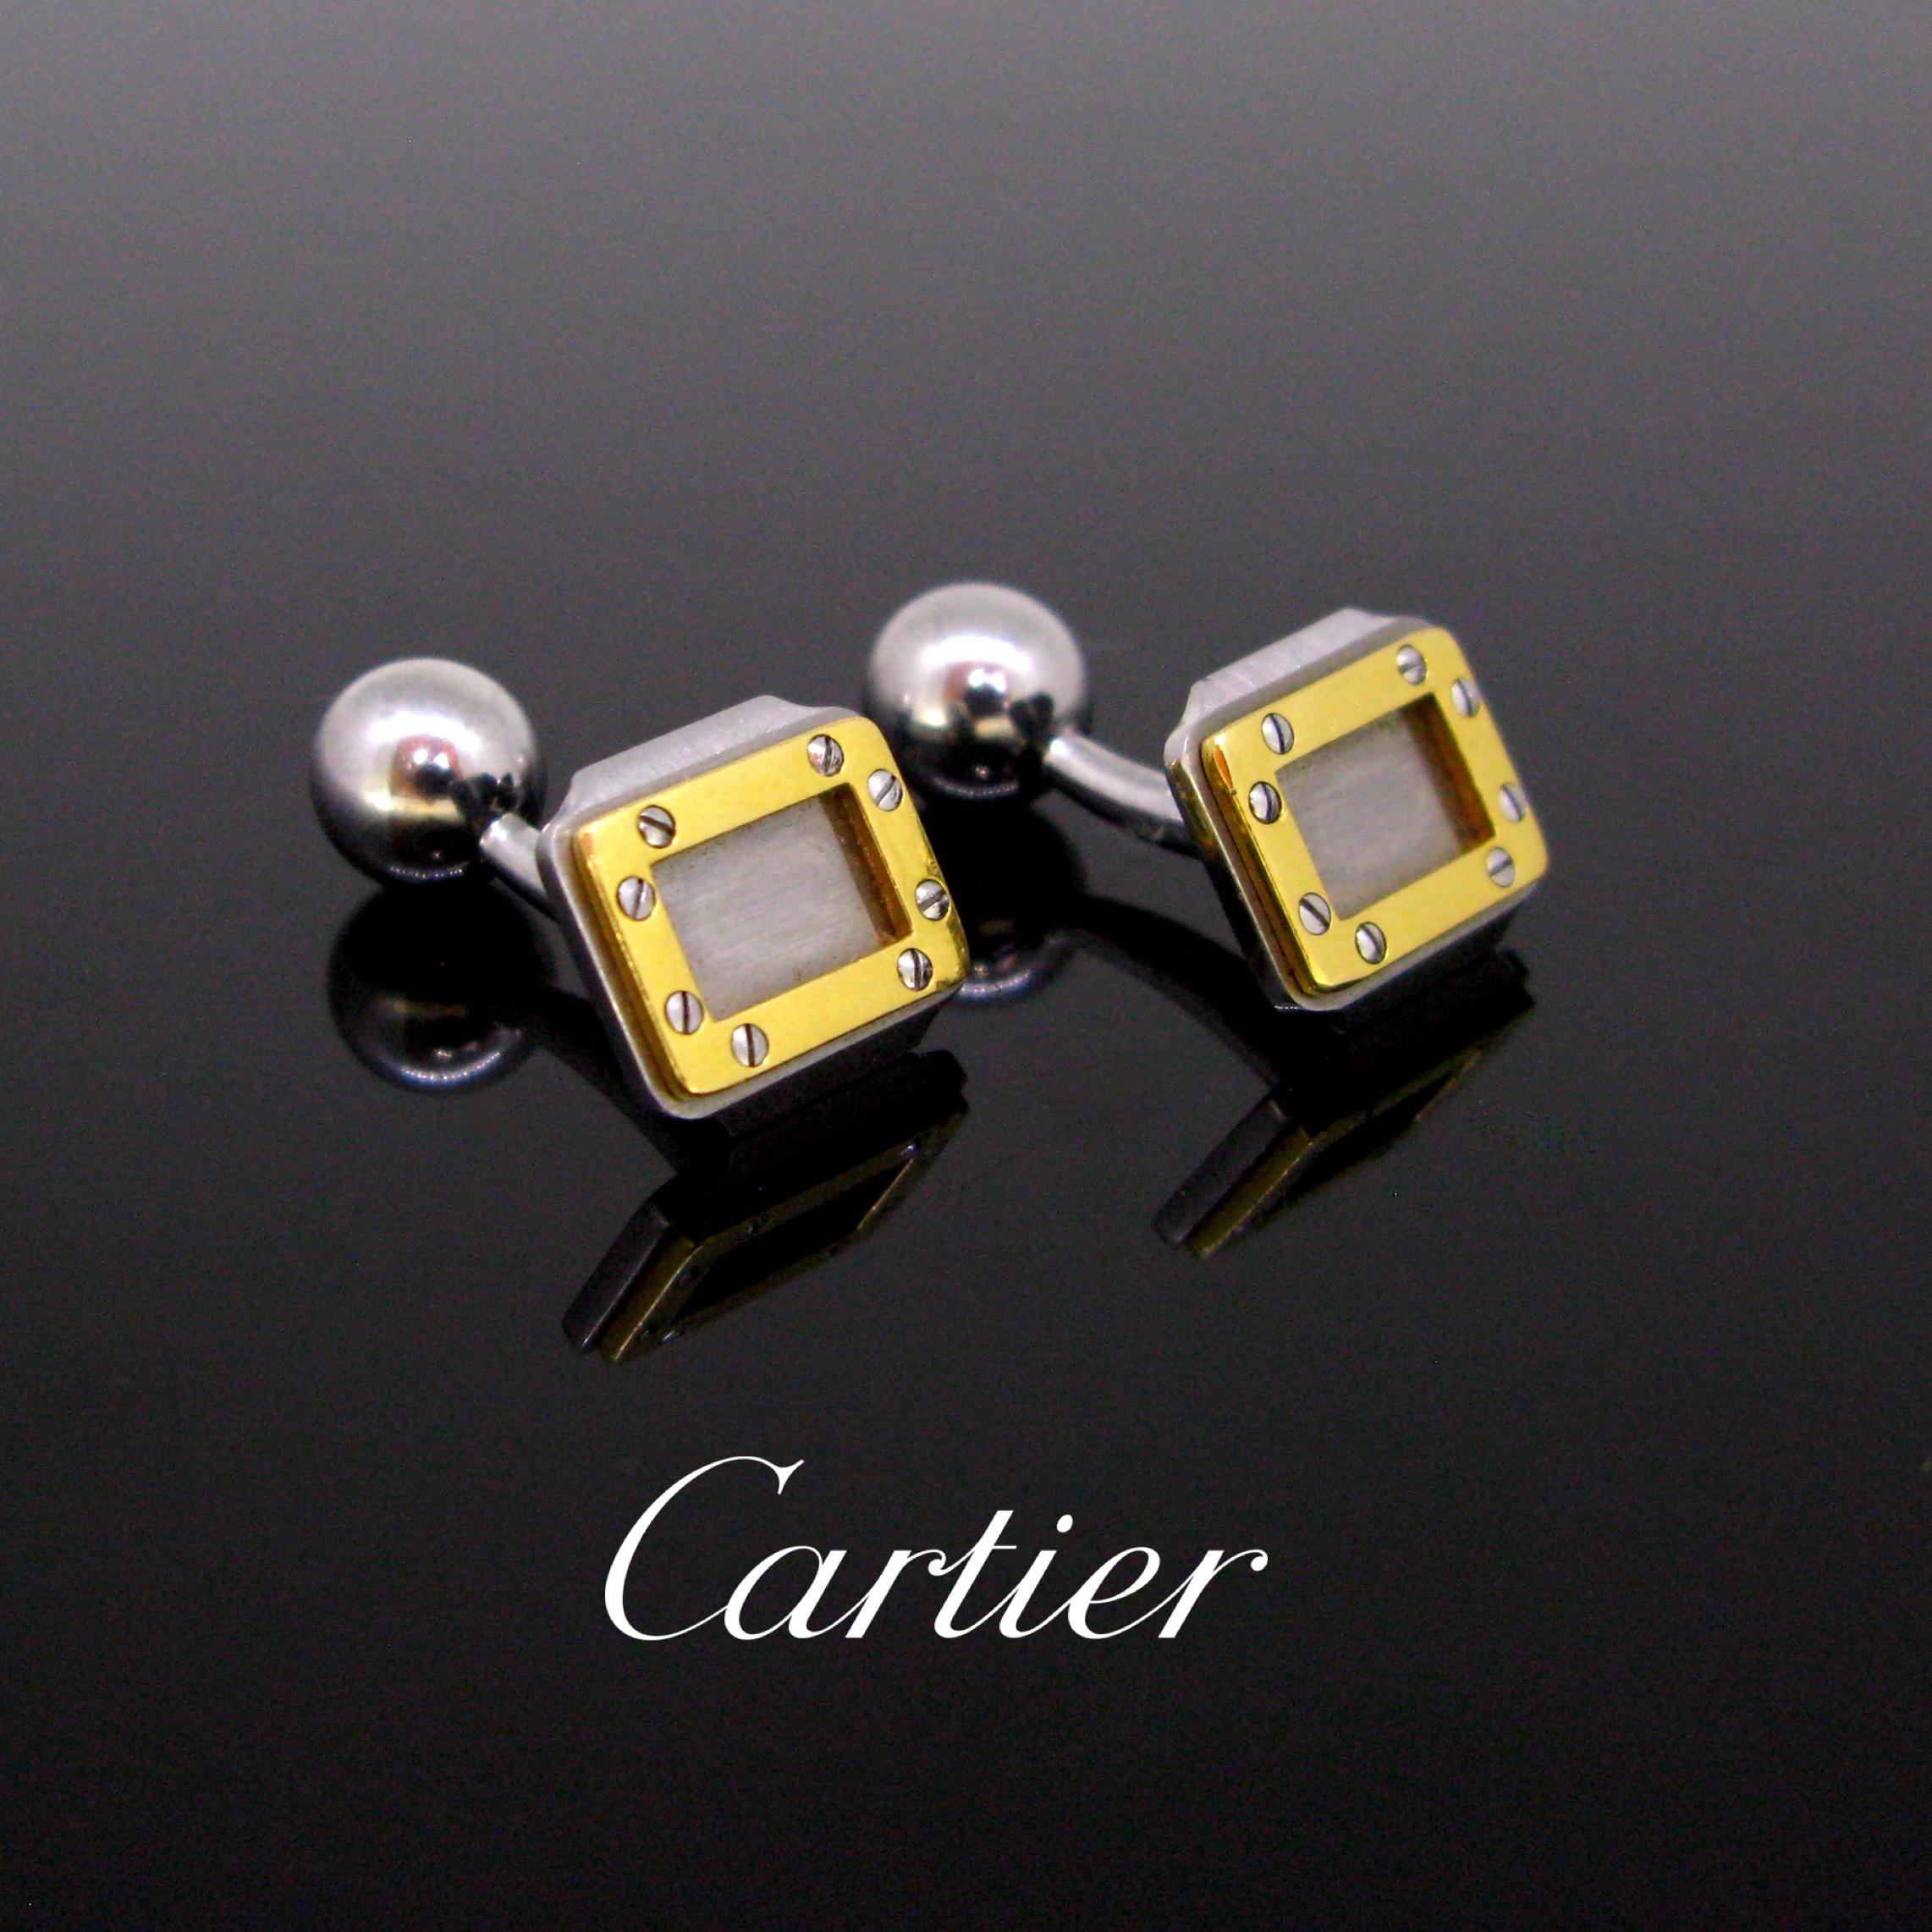 This pair of cufflinks comes from the Santos de Cartier Collection. They are made in Steel and enhanced with a screw motif in 18kt yellow gold on the front. The cufflinks are in very good condition. They are signed and numbered on the back. They